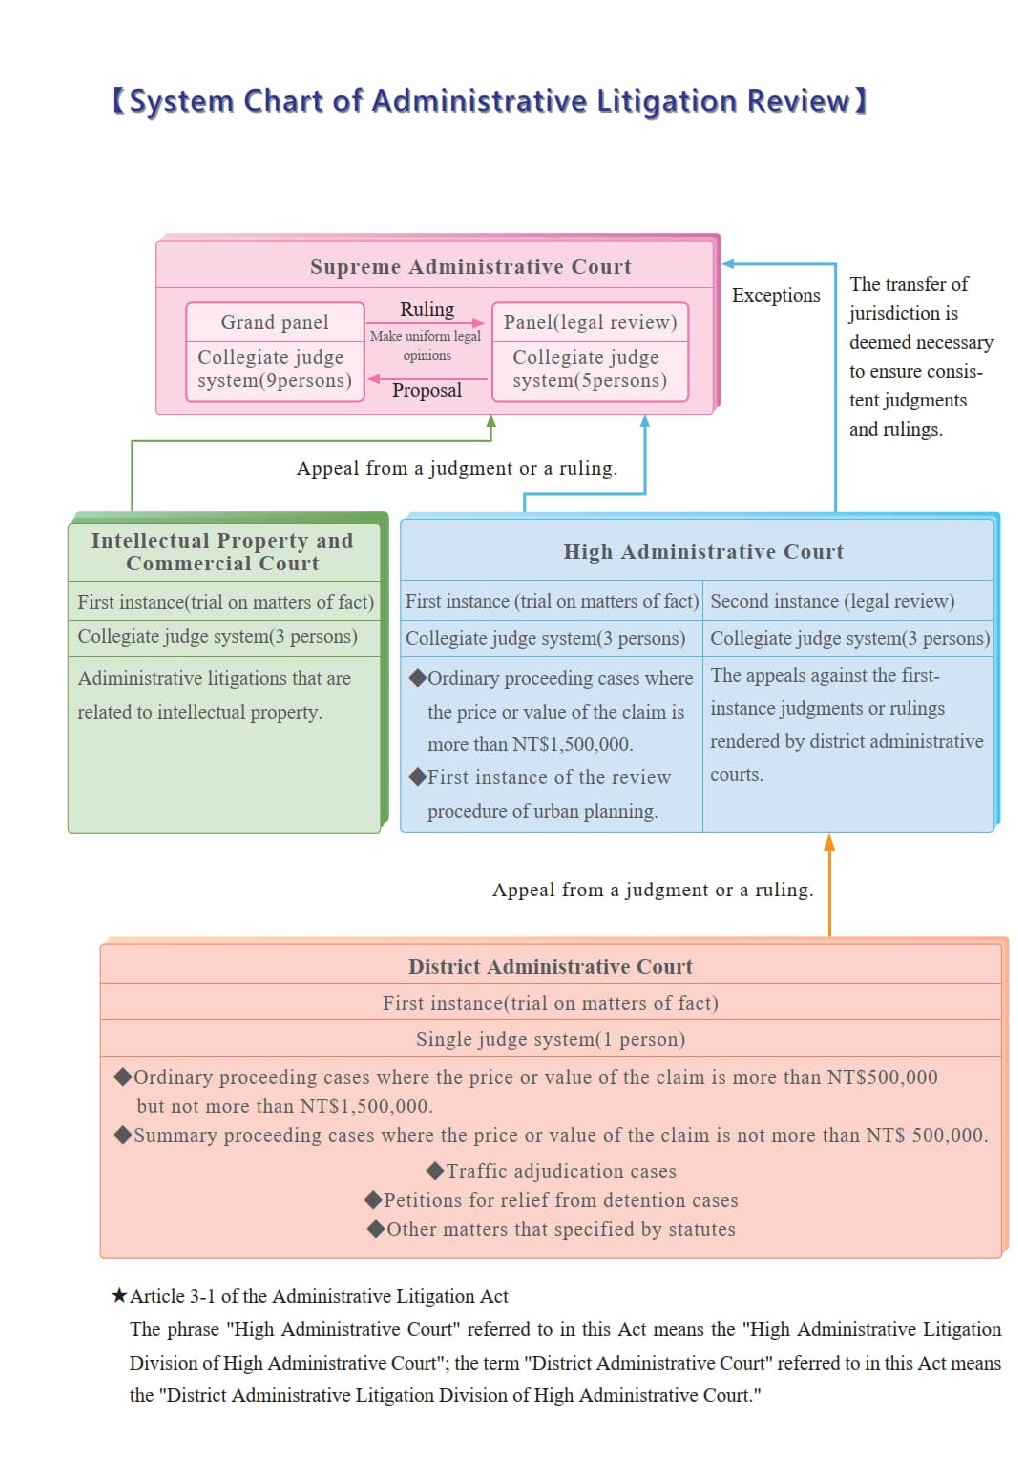 2023-System Chart of Administrative Litigation Review